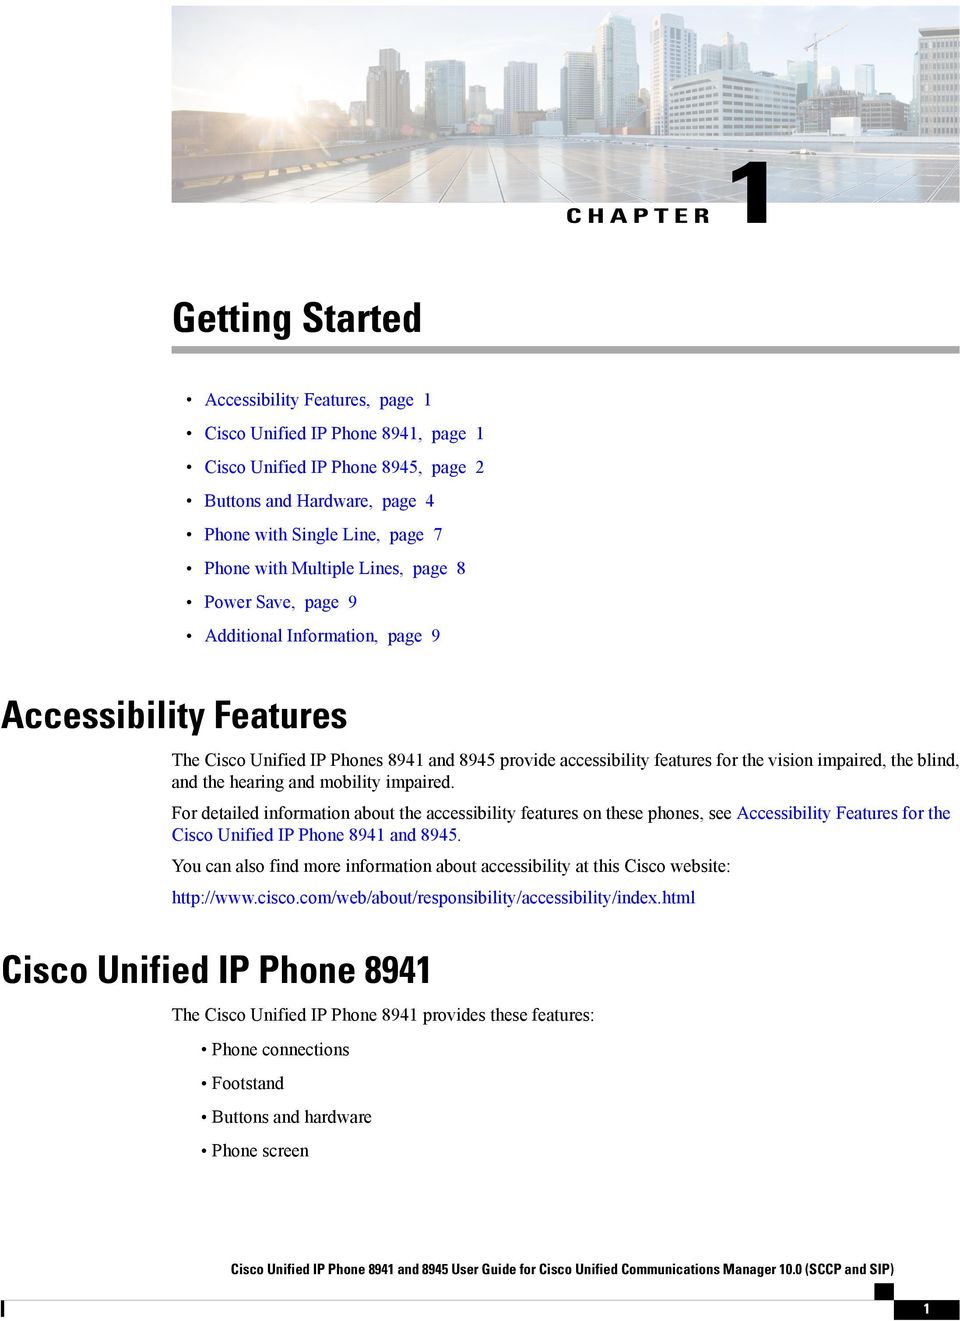 blind, and the hearing and mobility impaired. For detailed information about the accessibility features on these phones, see Accessibility Features for the Cisco Unified IP Phone 8941 and 8945.